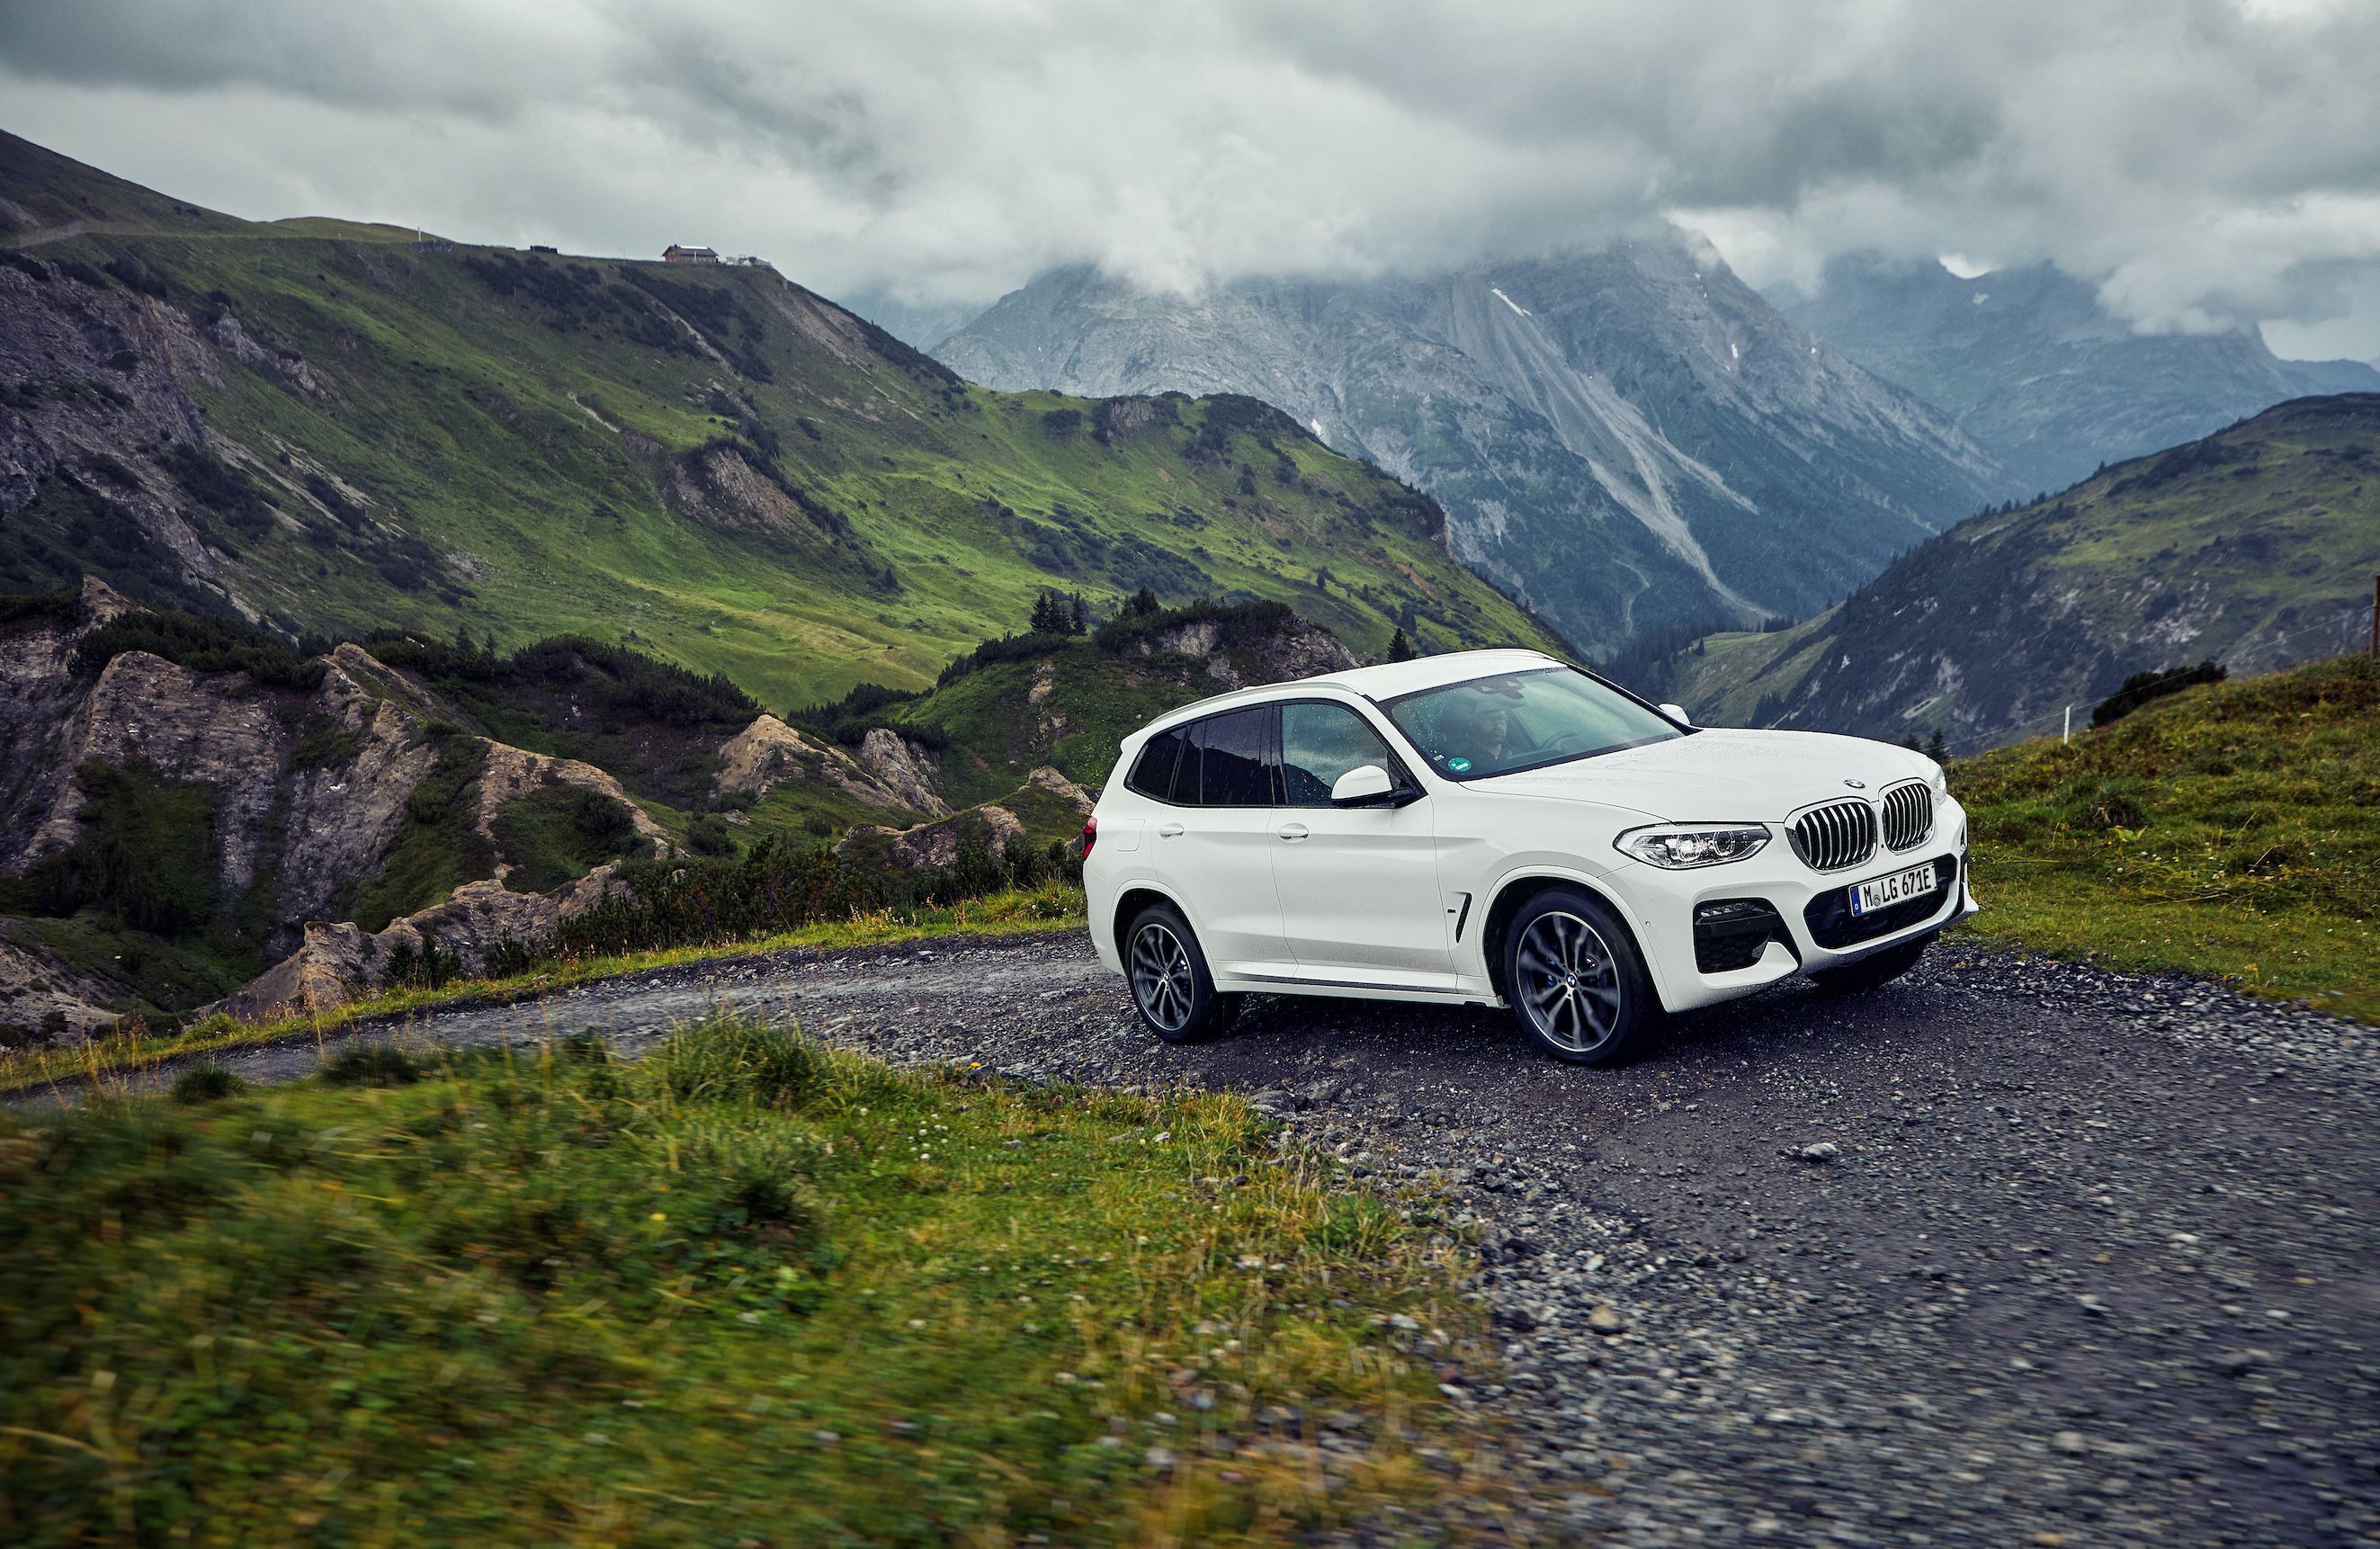 Car review: 2020 BMW X3 xDrive30E is fun and fuel-sipping